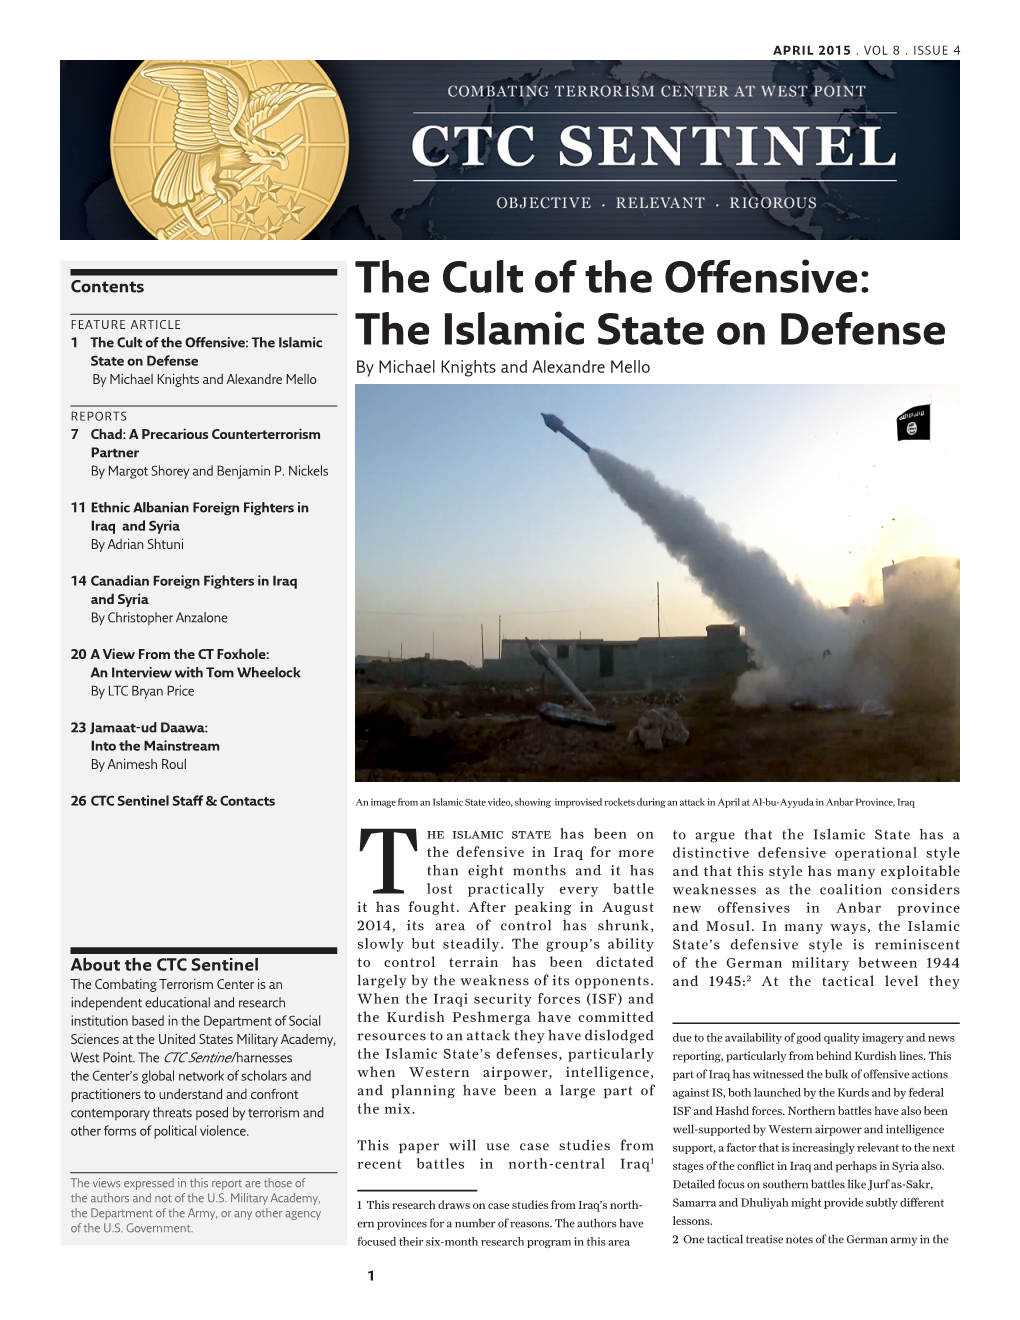 The Cult of the Offensive: the Islamic State on Defense